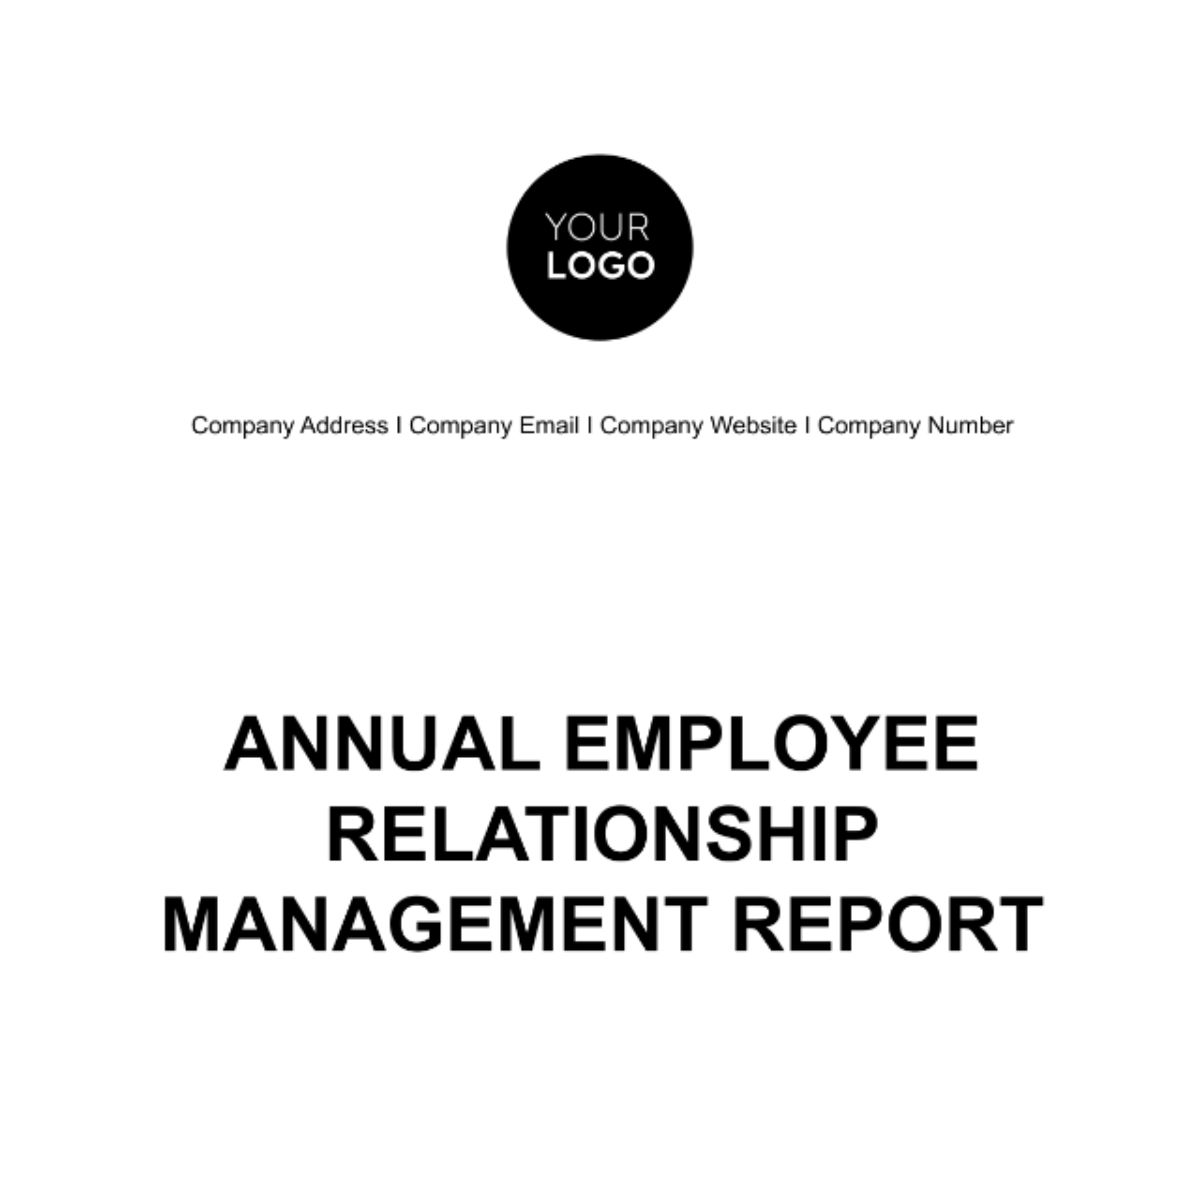 Free Annual Employee Relationship Management Report HR Template